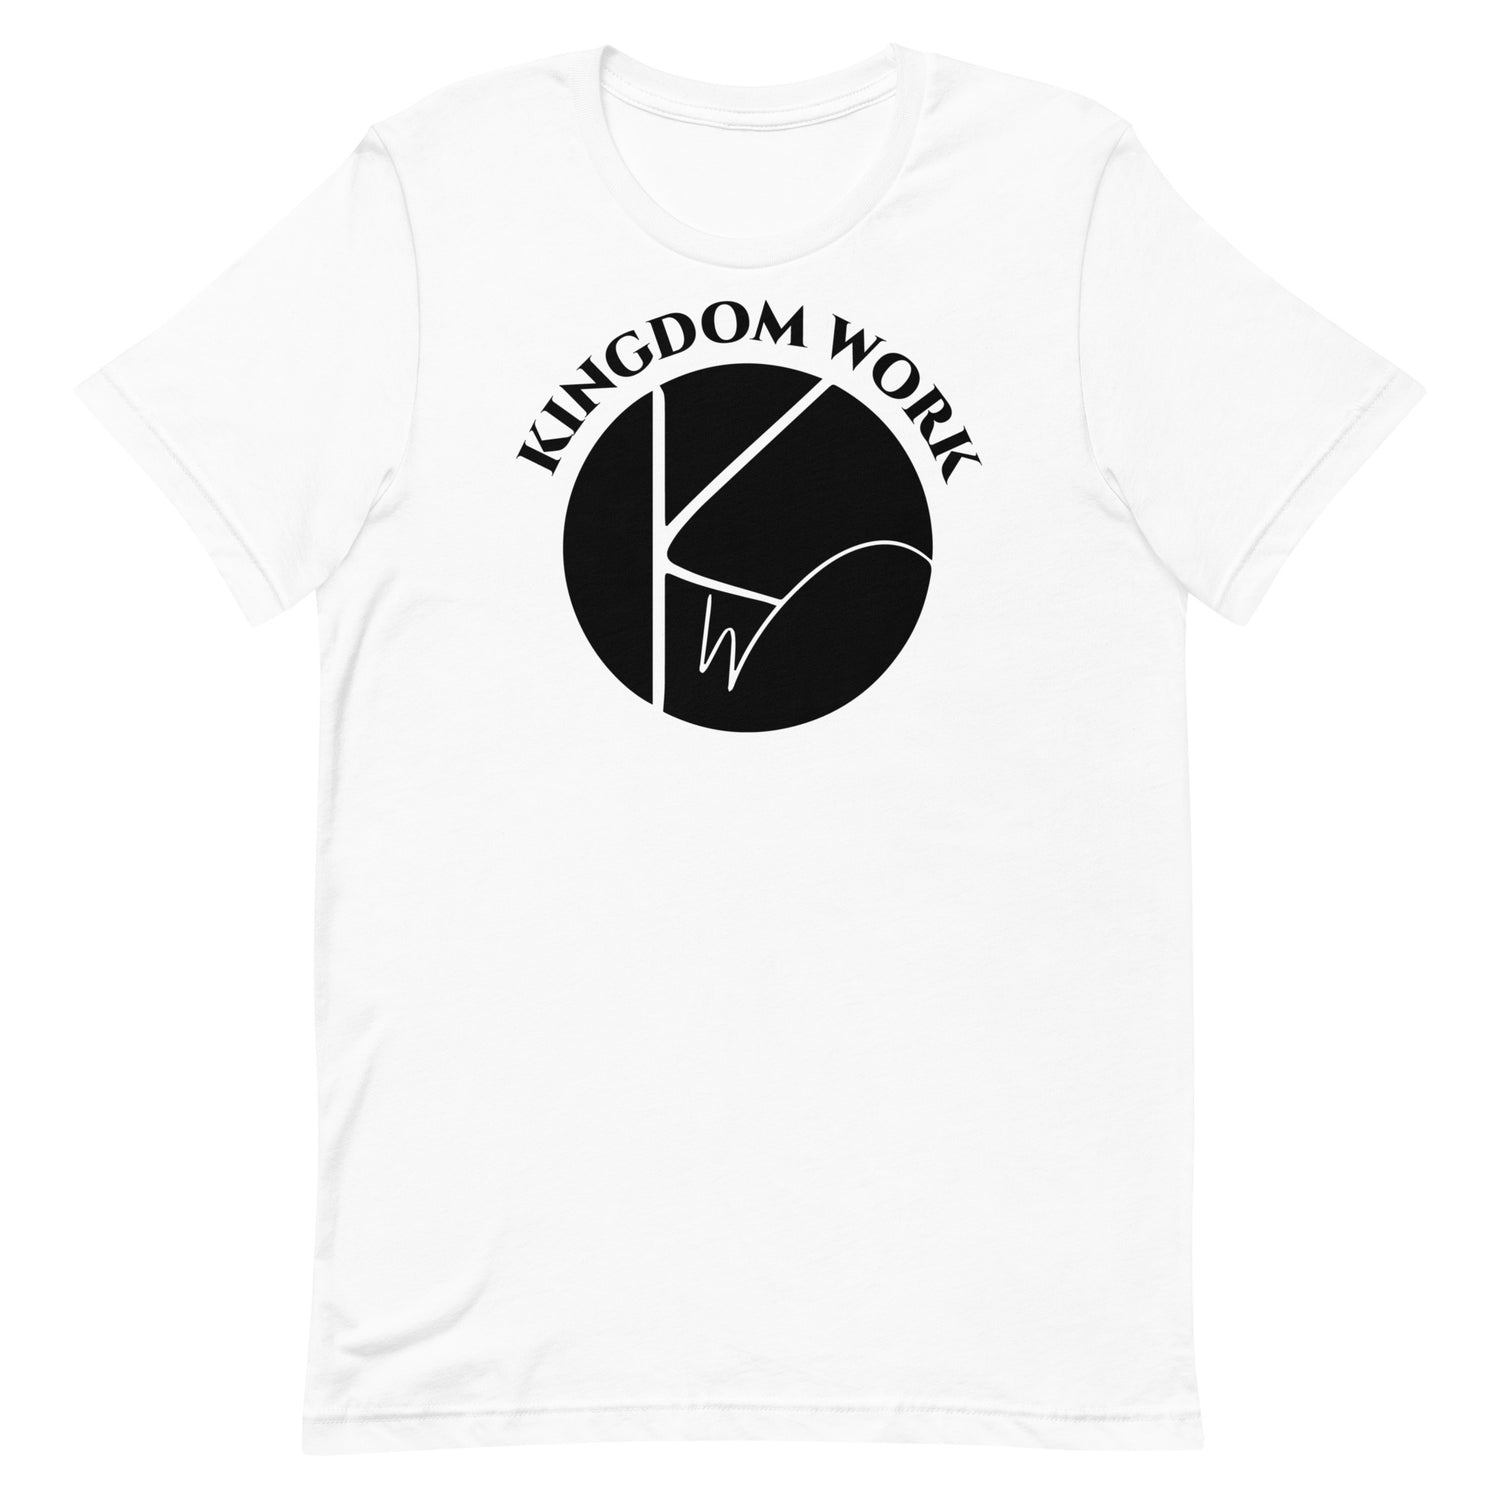 KINGDOM WORK 02 MENS FRONT AND BACK T-SHIRT